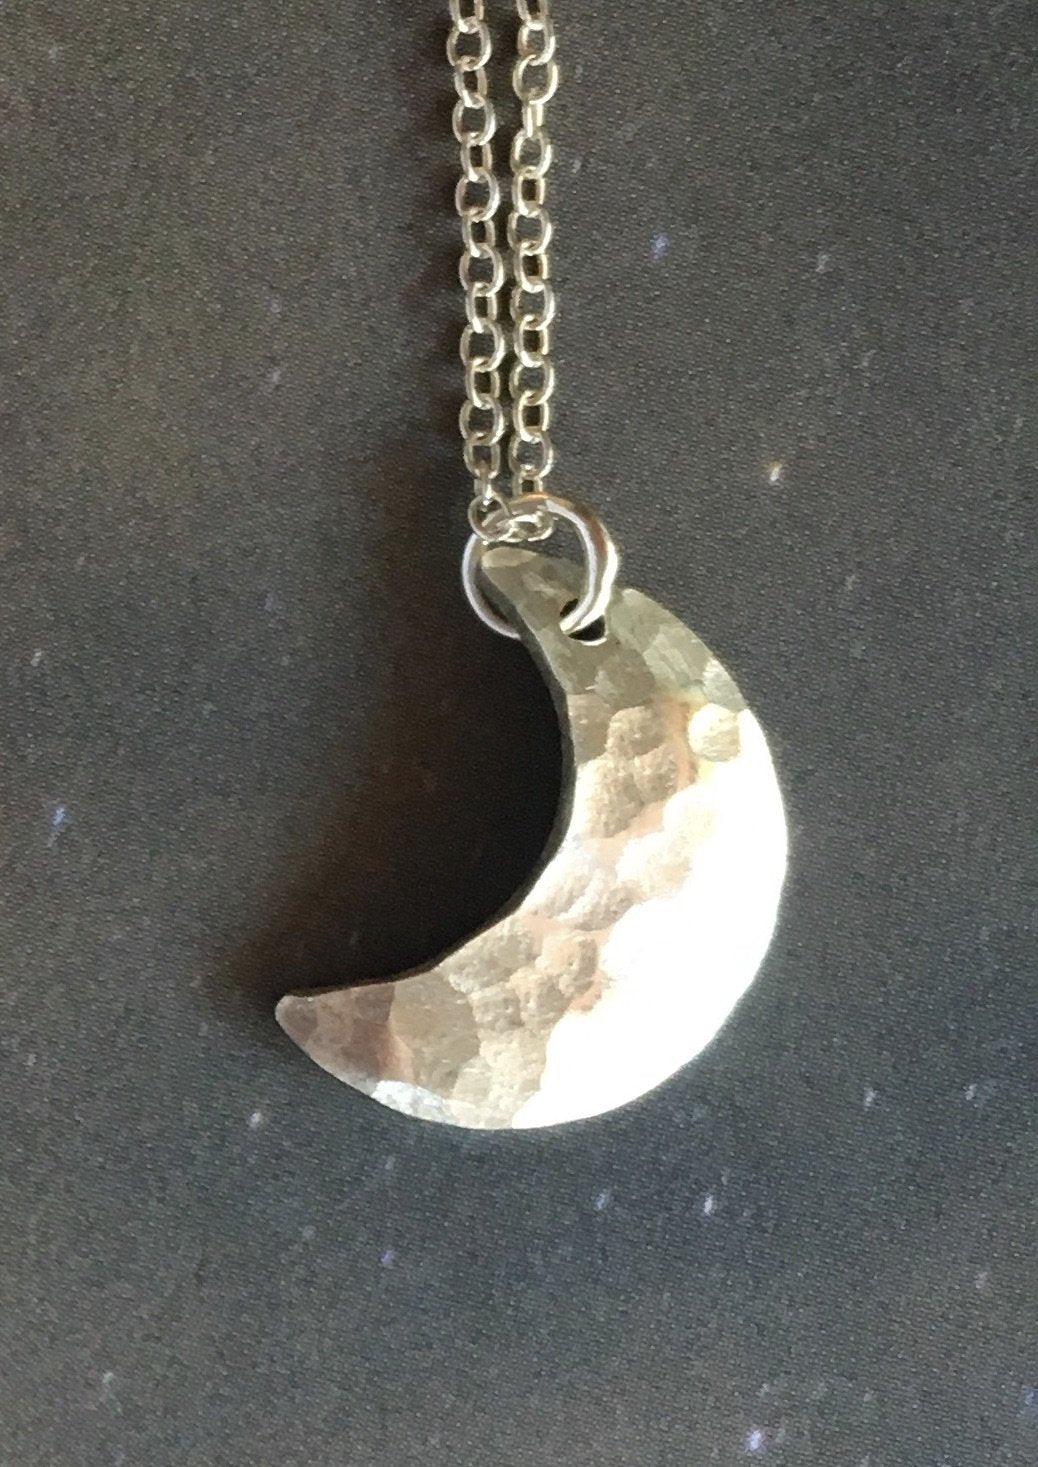 Crescent Moon Necklace - Melomys